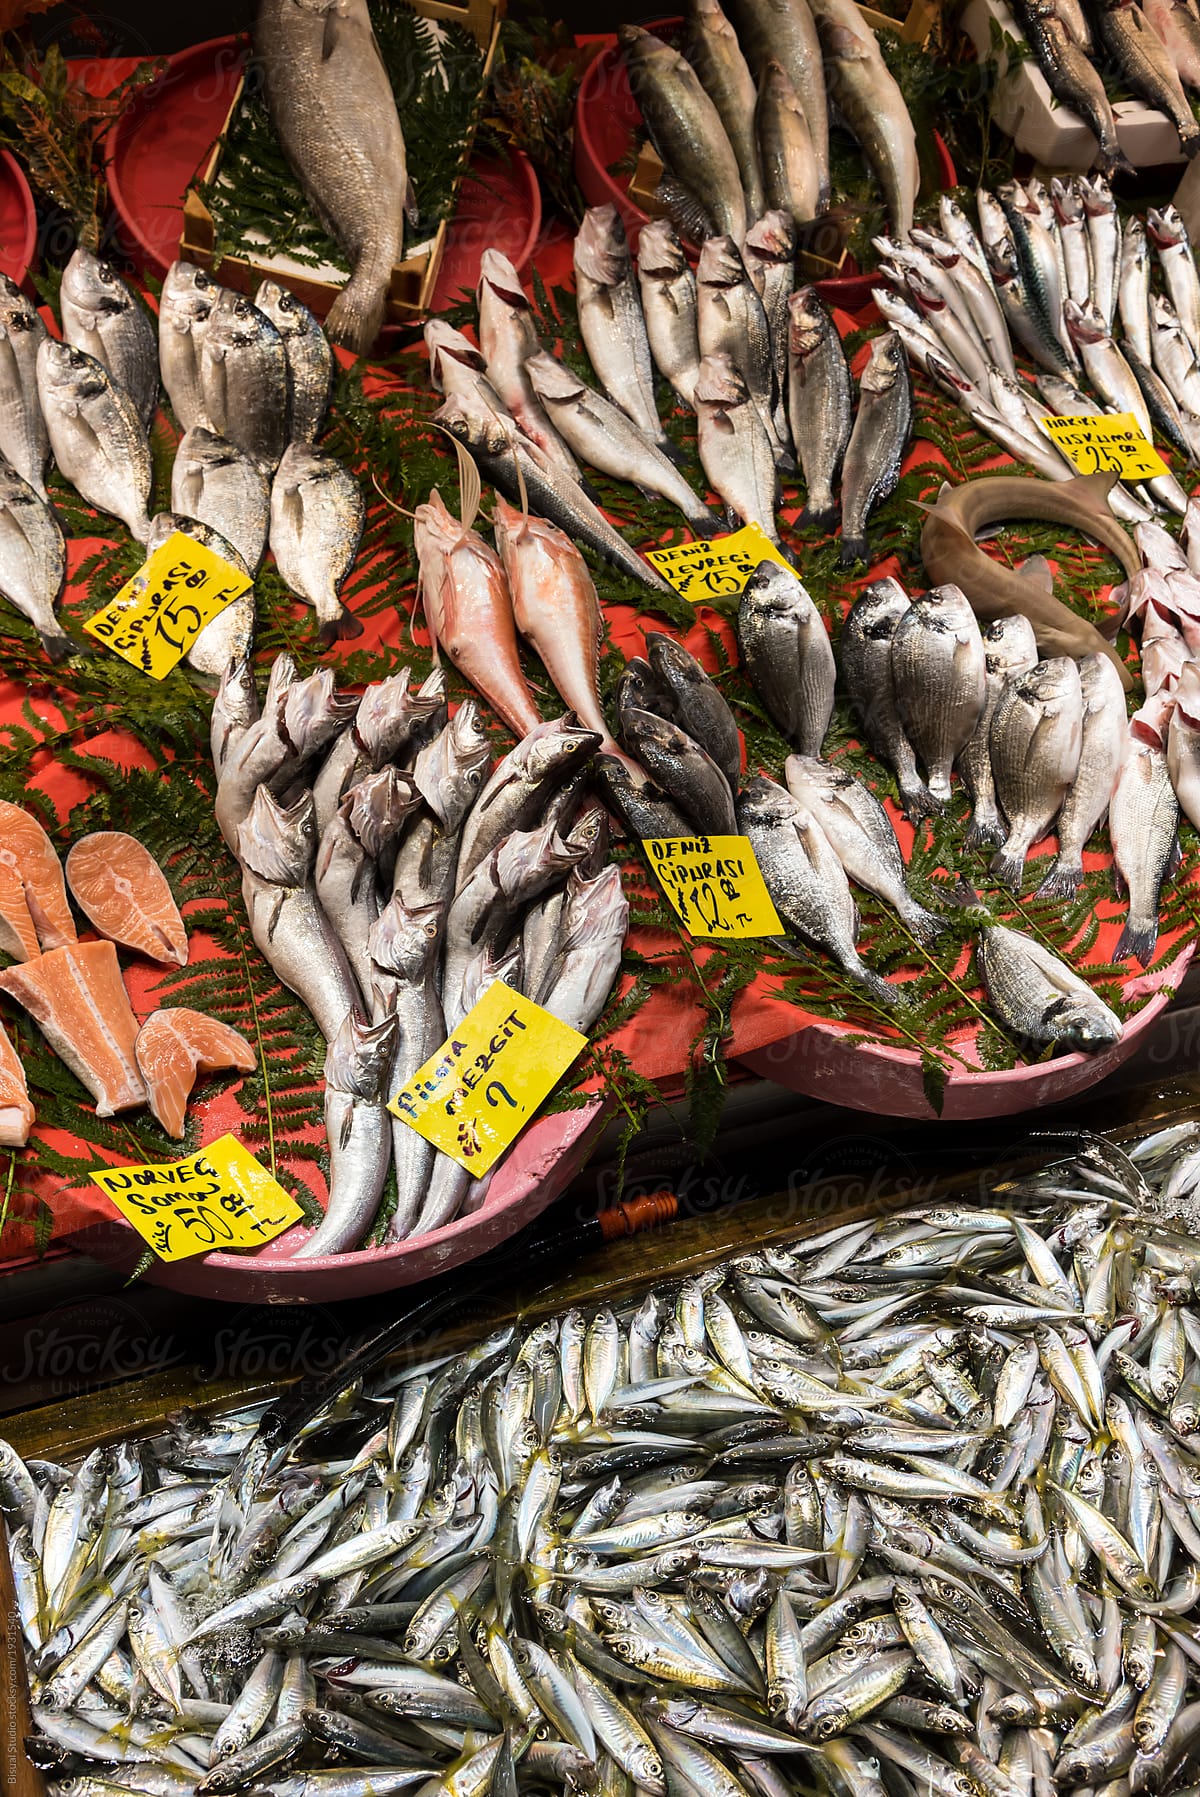 Piles of fish on the market